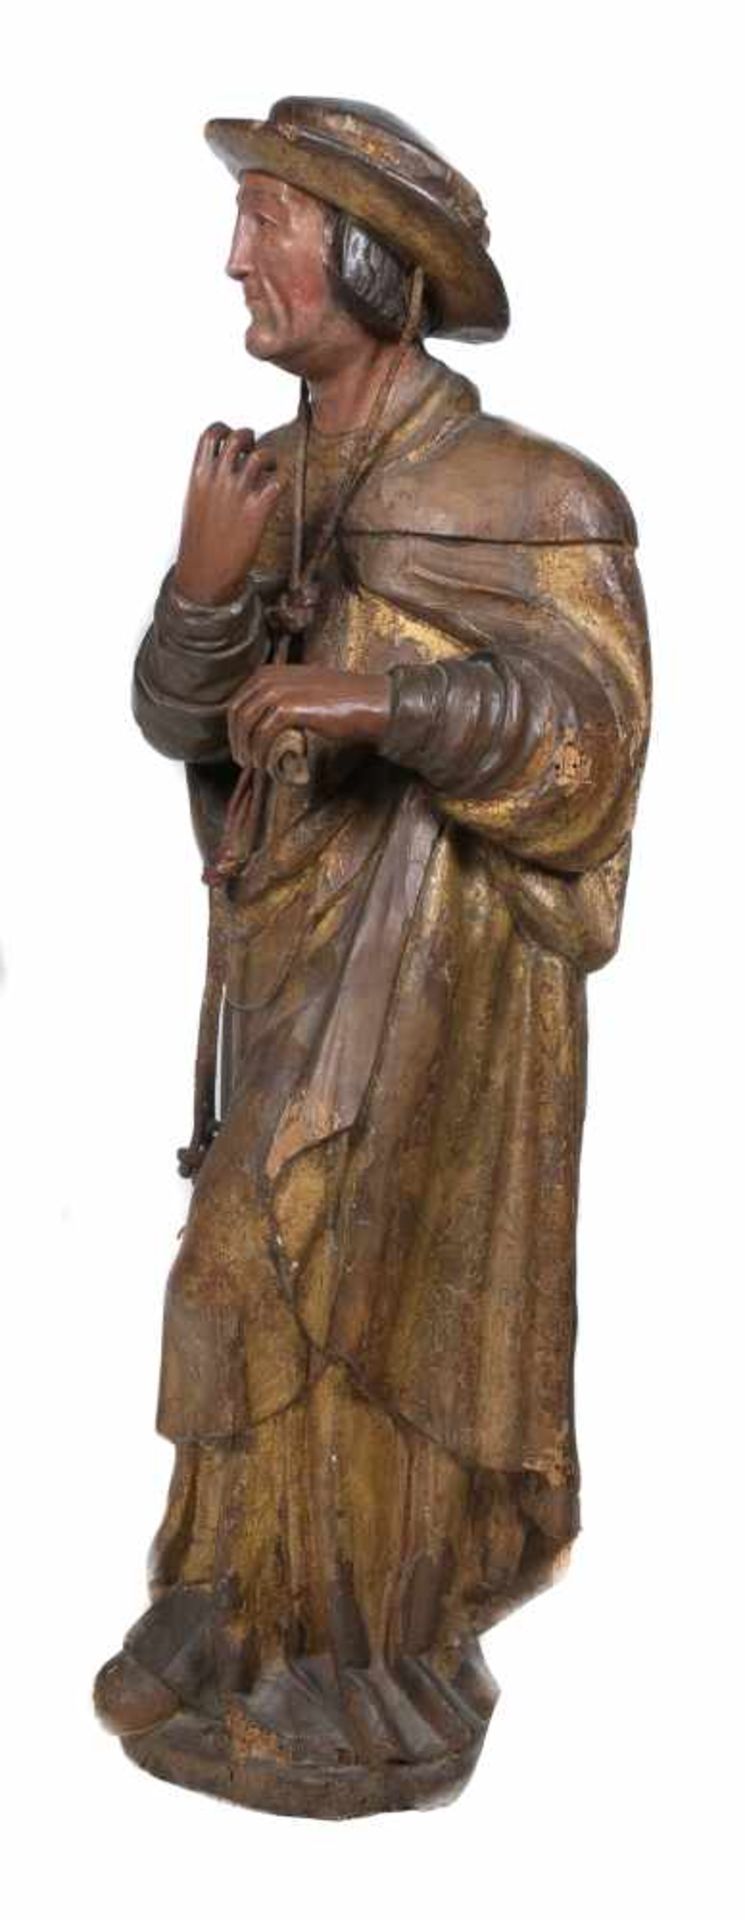 "Saint Jerome" Carved, gilded and polychromed wooden sculpture. Possibly German. Late 15th century. - Bild 2 aus 3